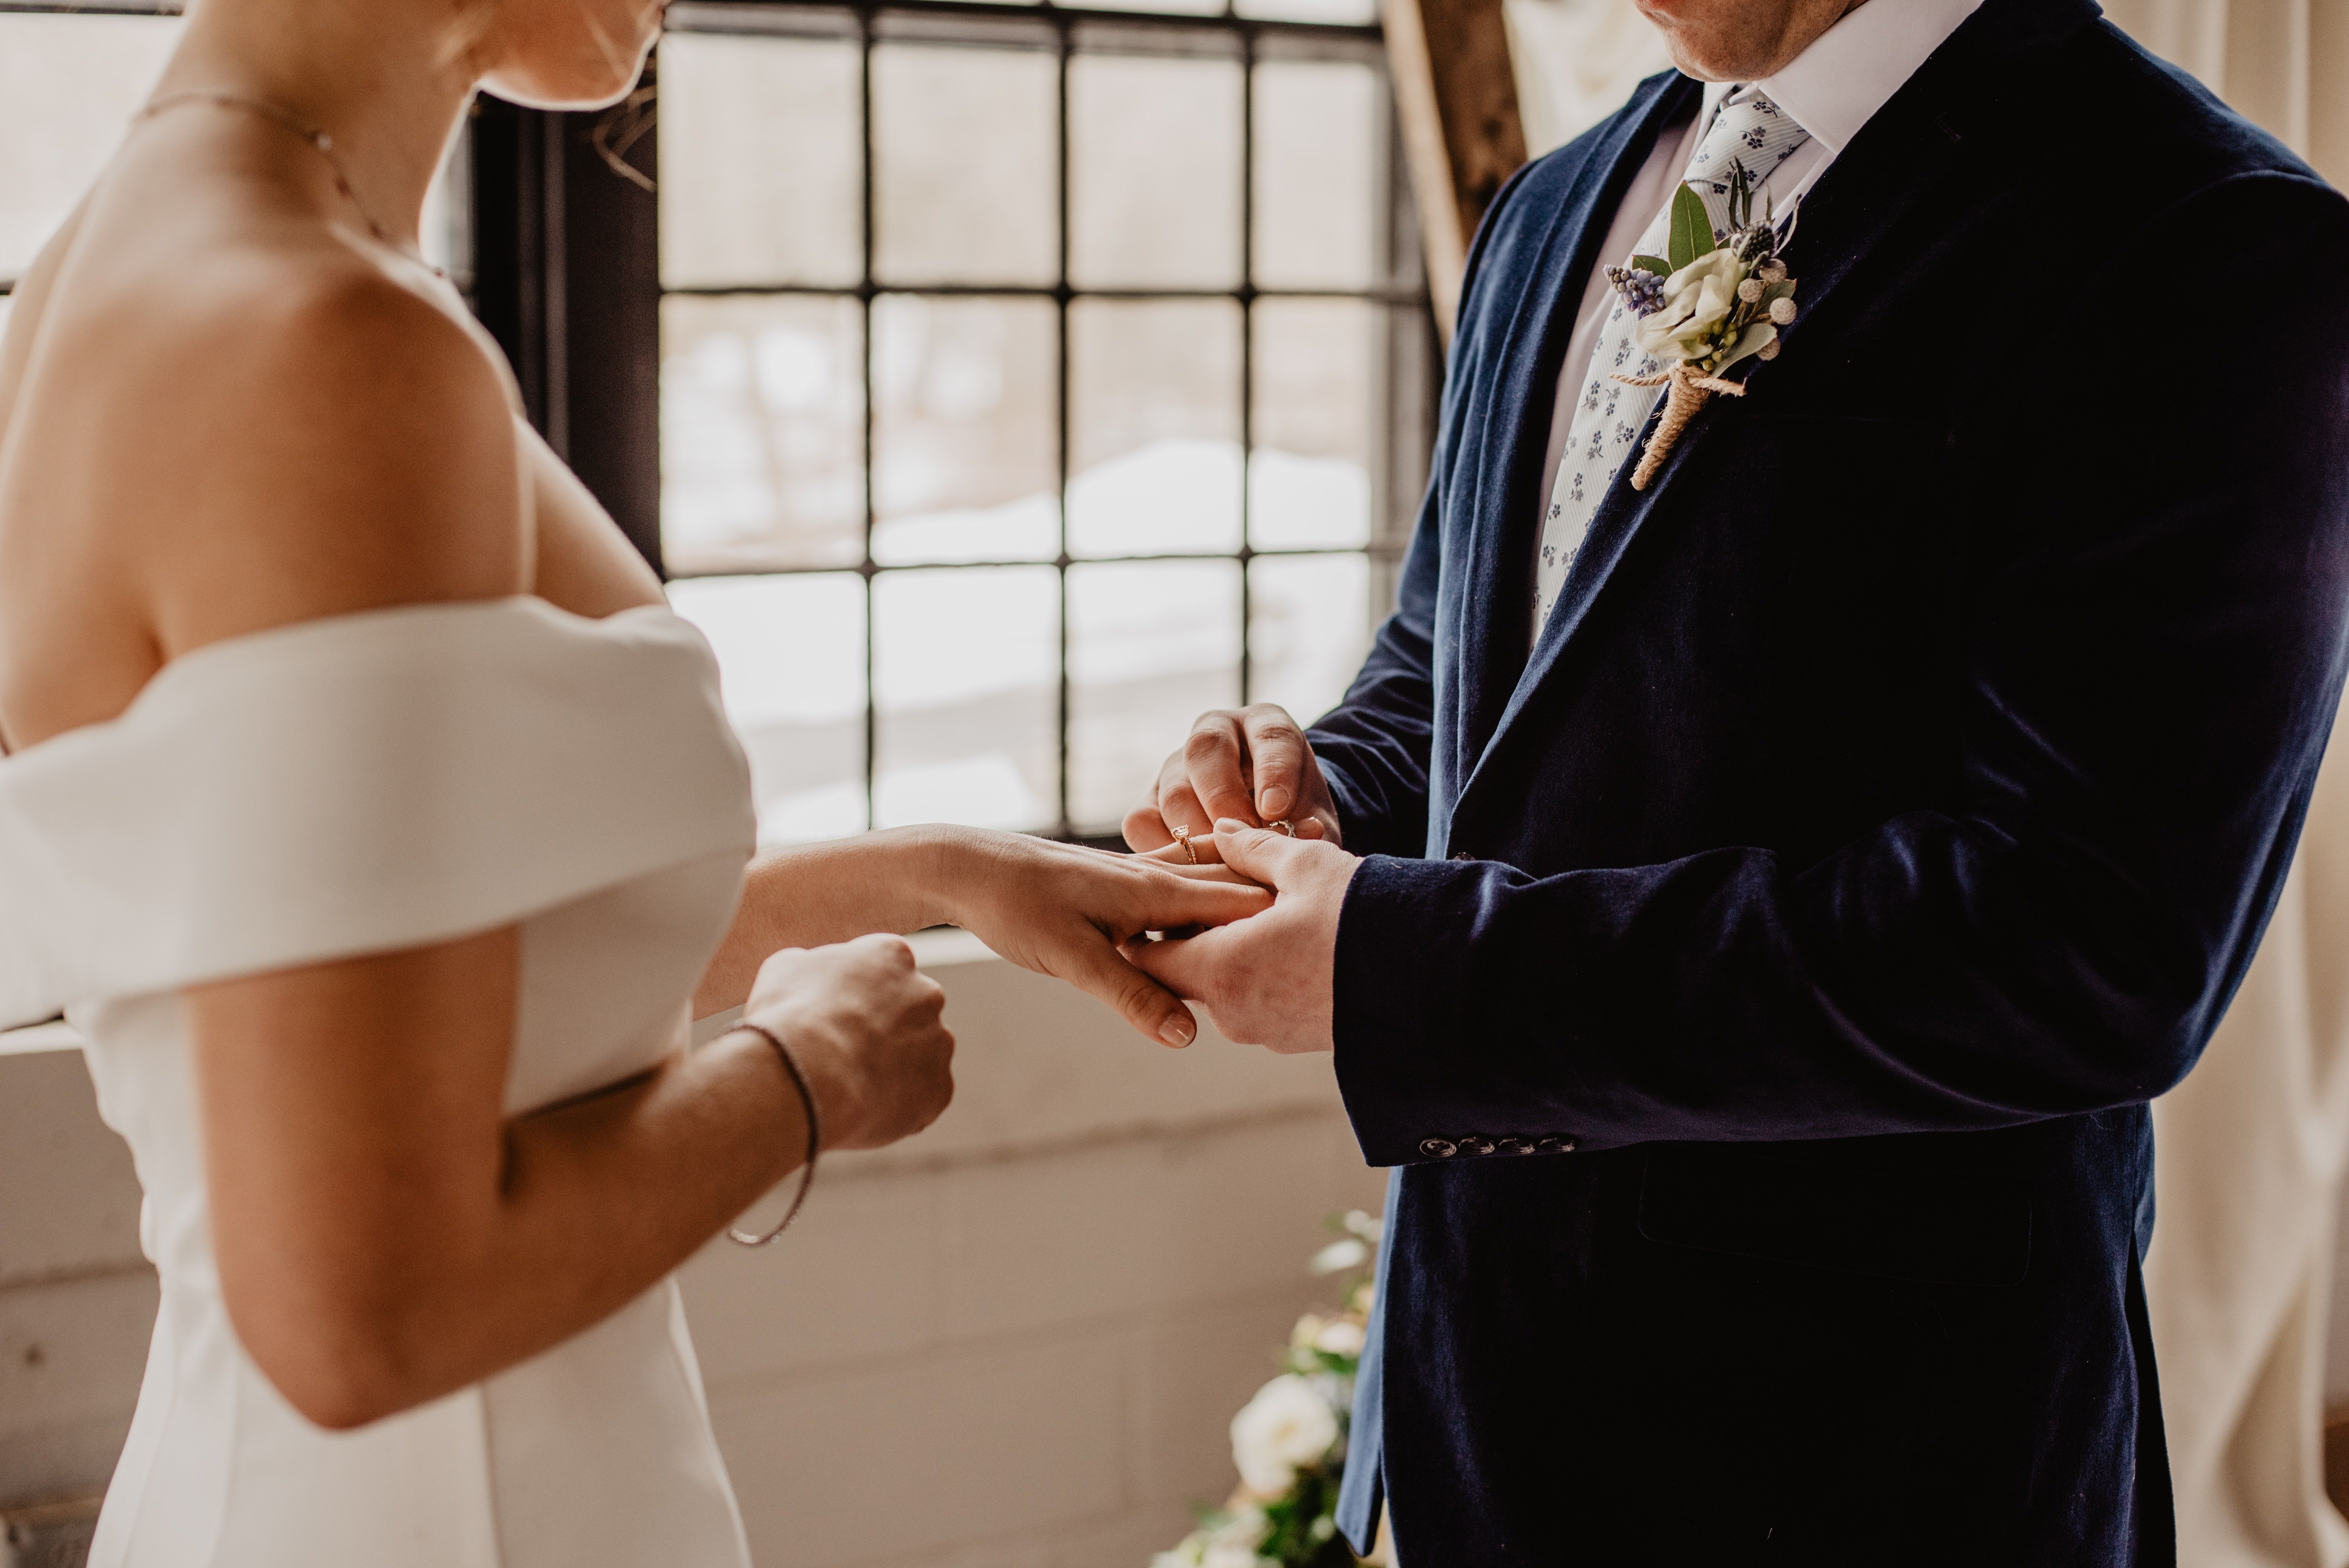 Alex started to act strangely after the wedding. | Source: Pexels